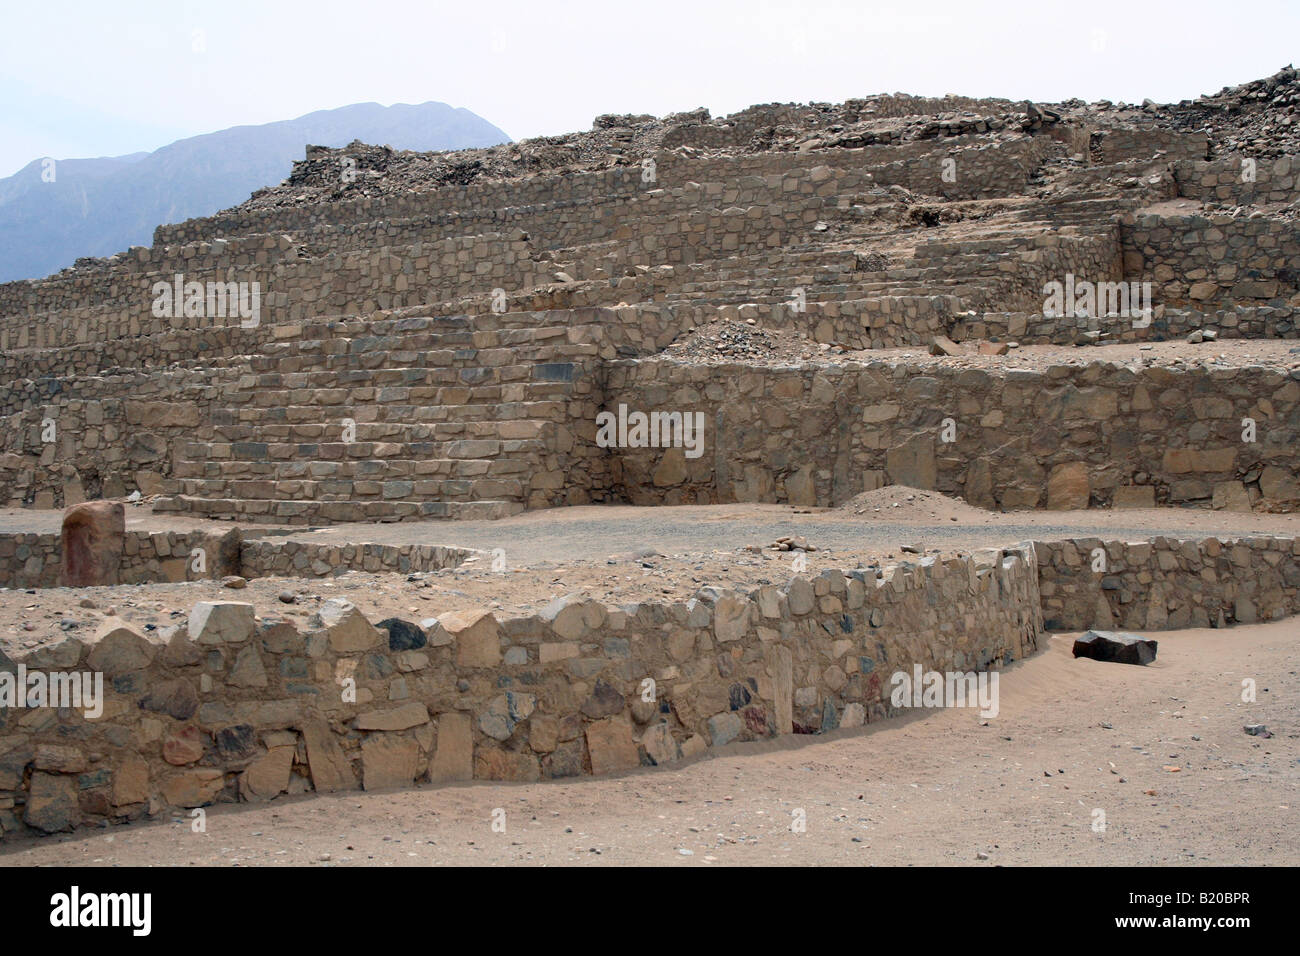 The Pyramid of the Quarry at the Caral archeological site near Barranca, Peru north of Lima. Stock Photo